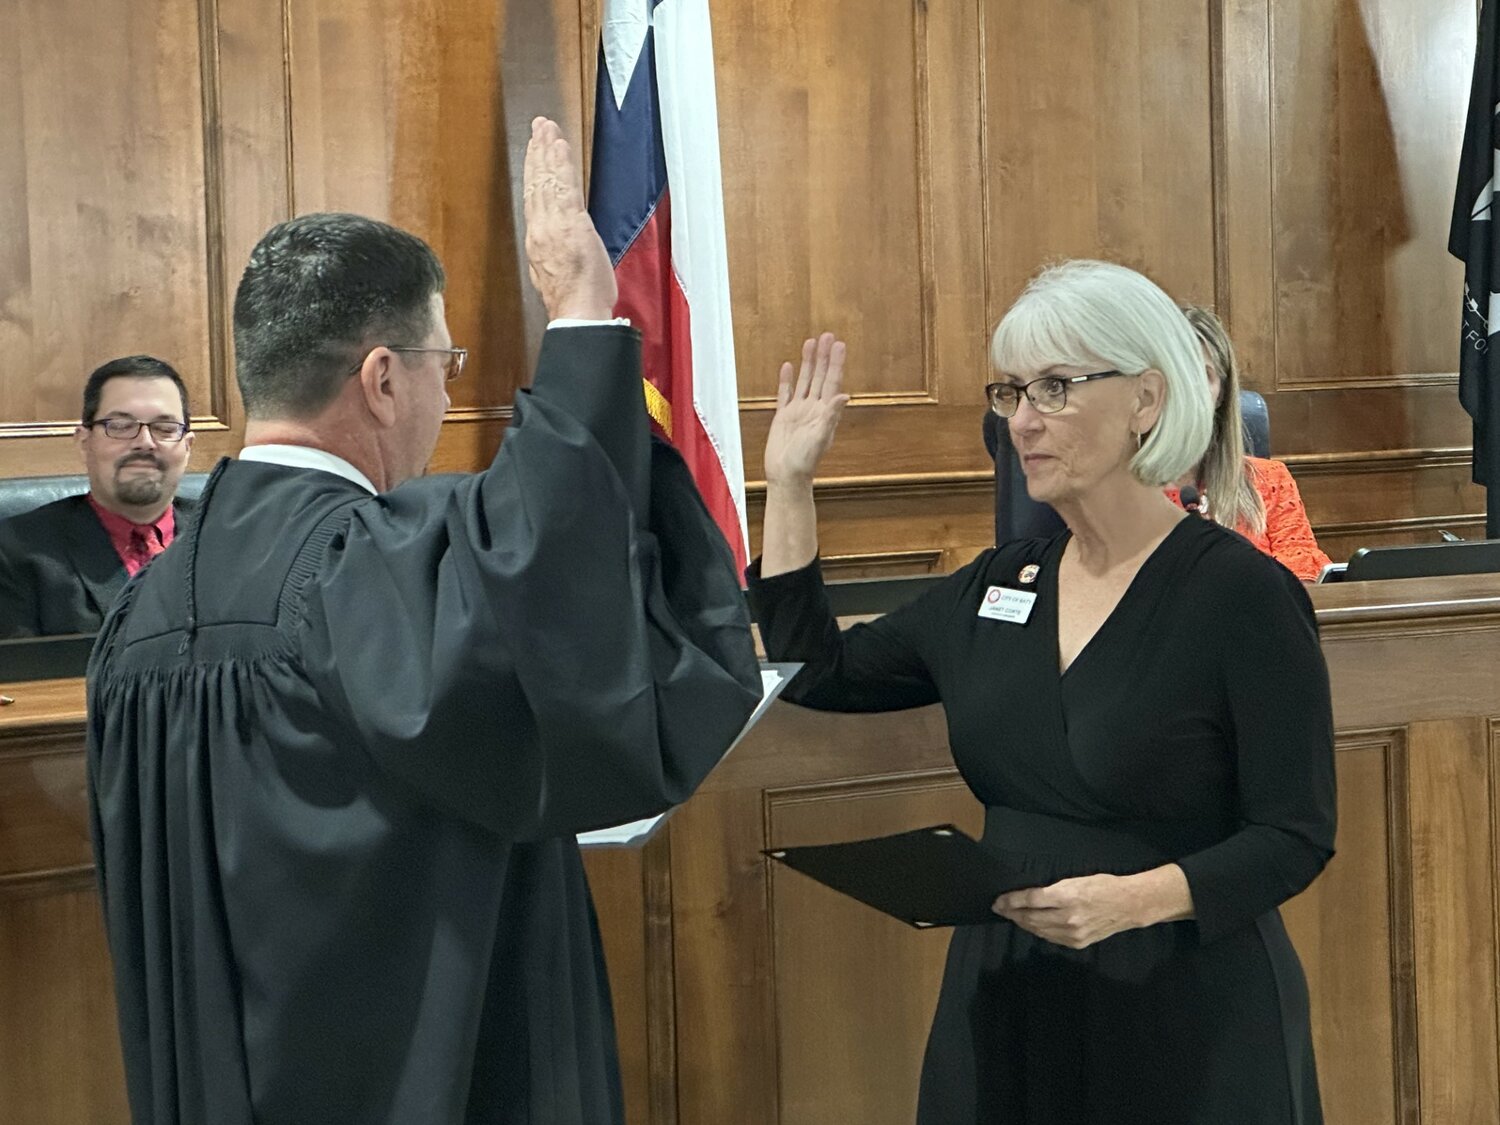 Ward A Council Member Janet Corte takes the oath of office from Katy Municipal Judge Jeffrey Brashear at the May 22 council meeting.